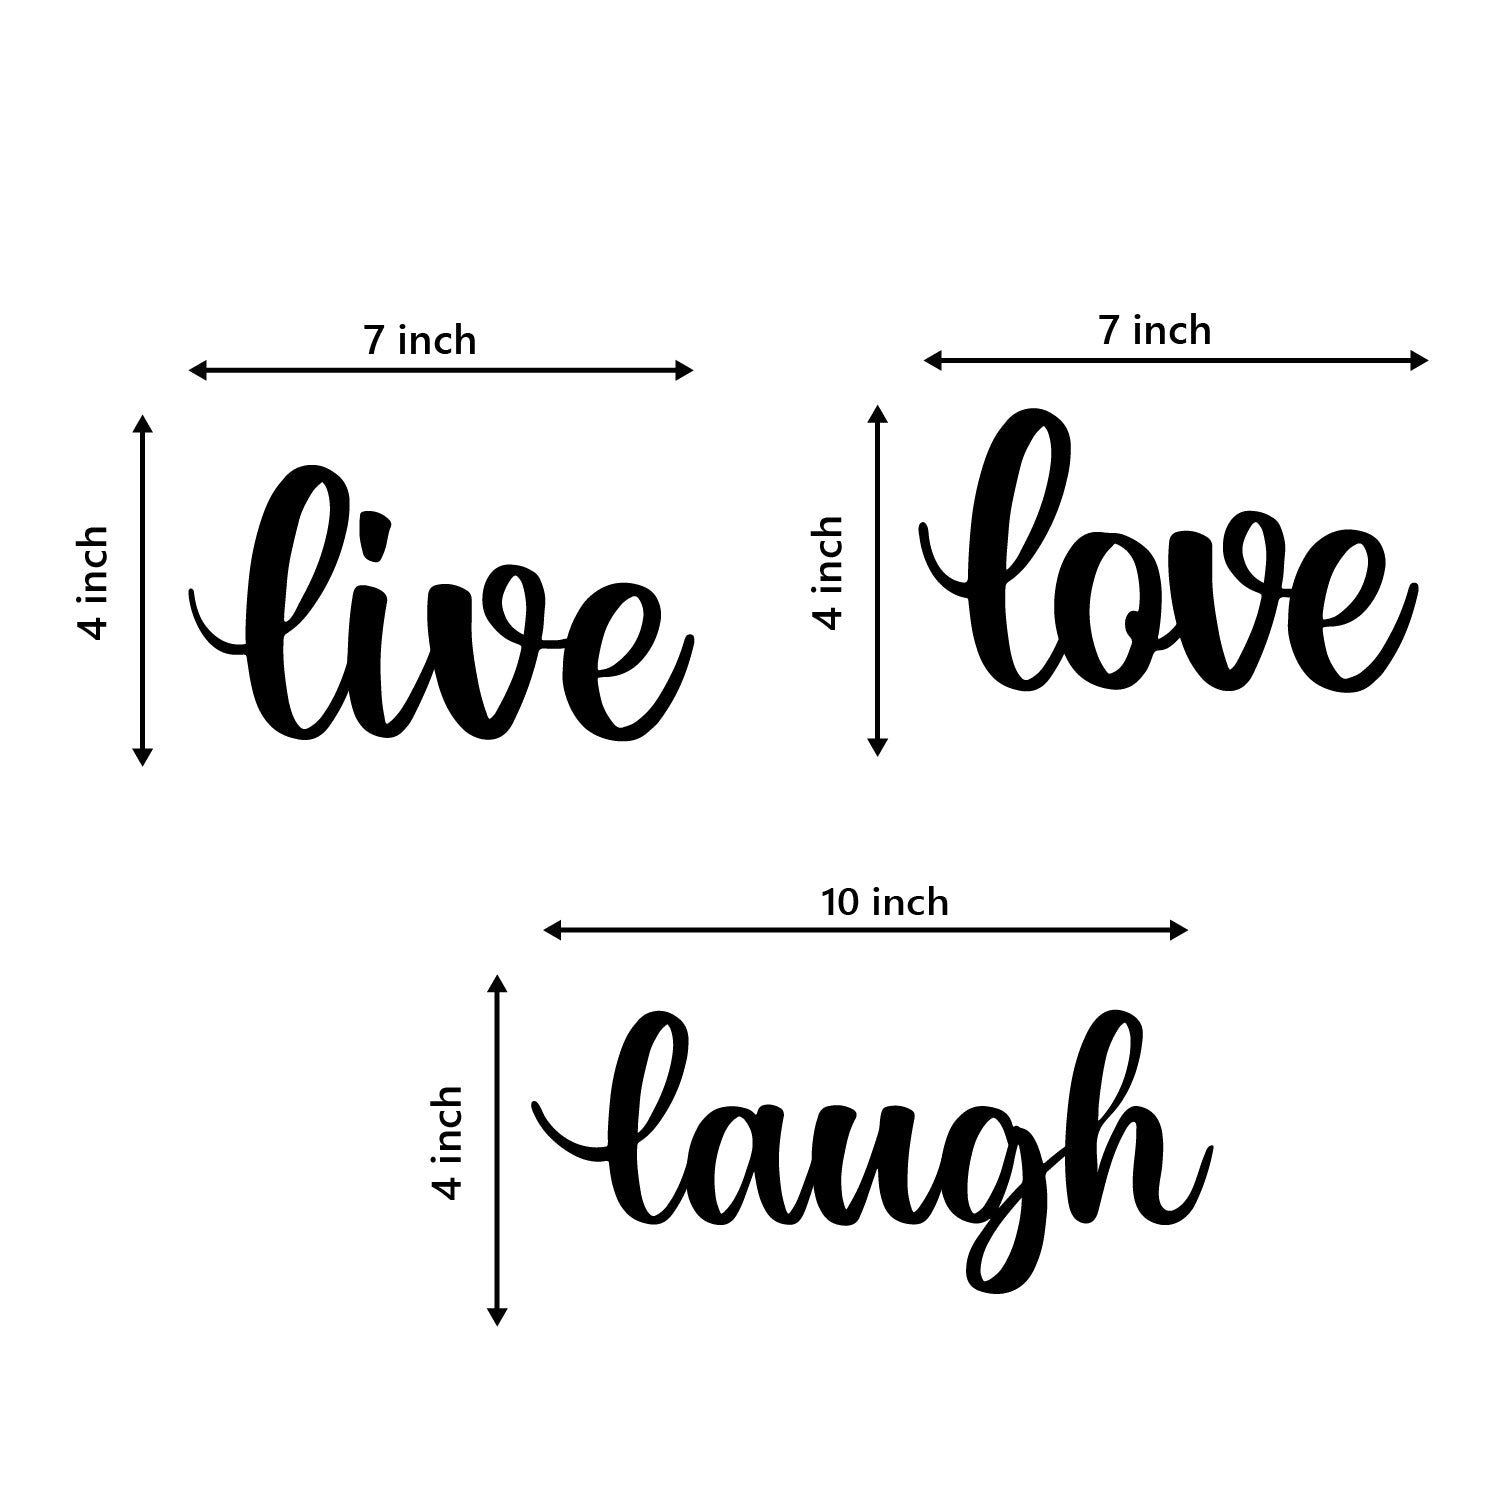 "Live Love Laugh" Black MDF Engineered Wooden Wall Art/Hanging Cutout for Home Decor 3